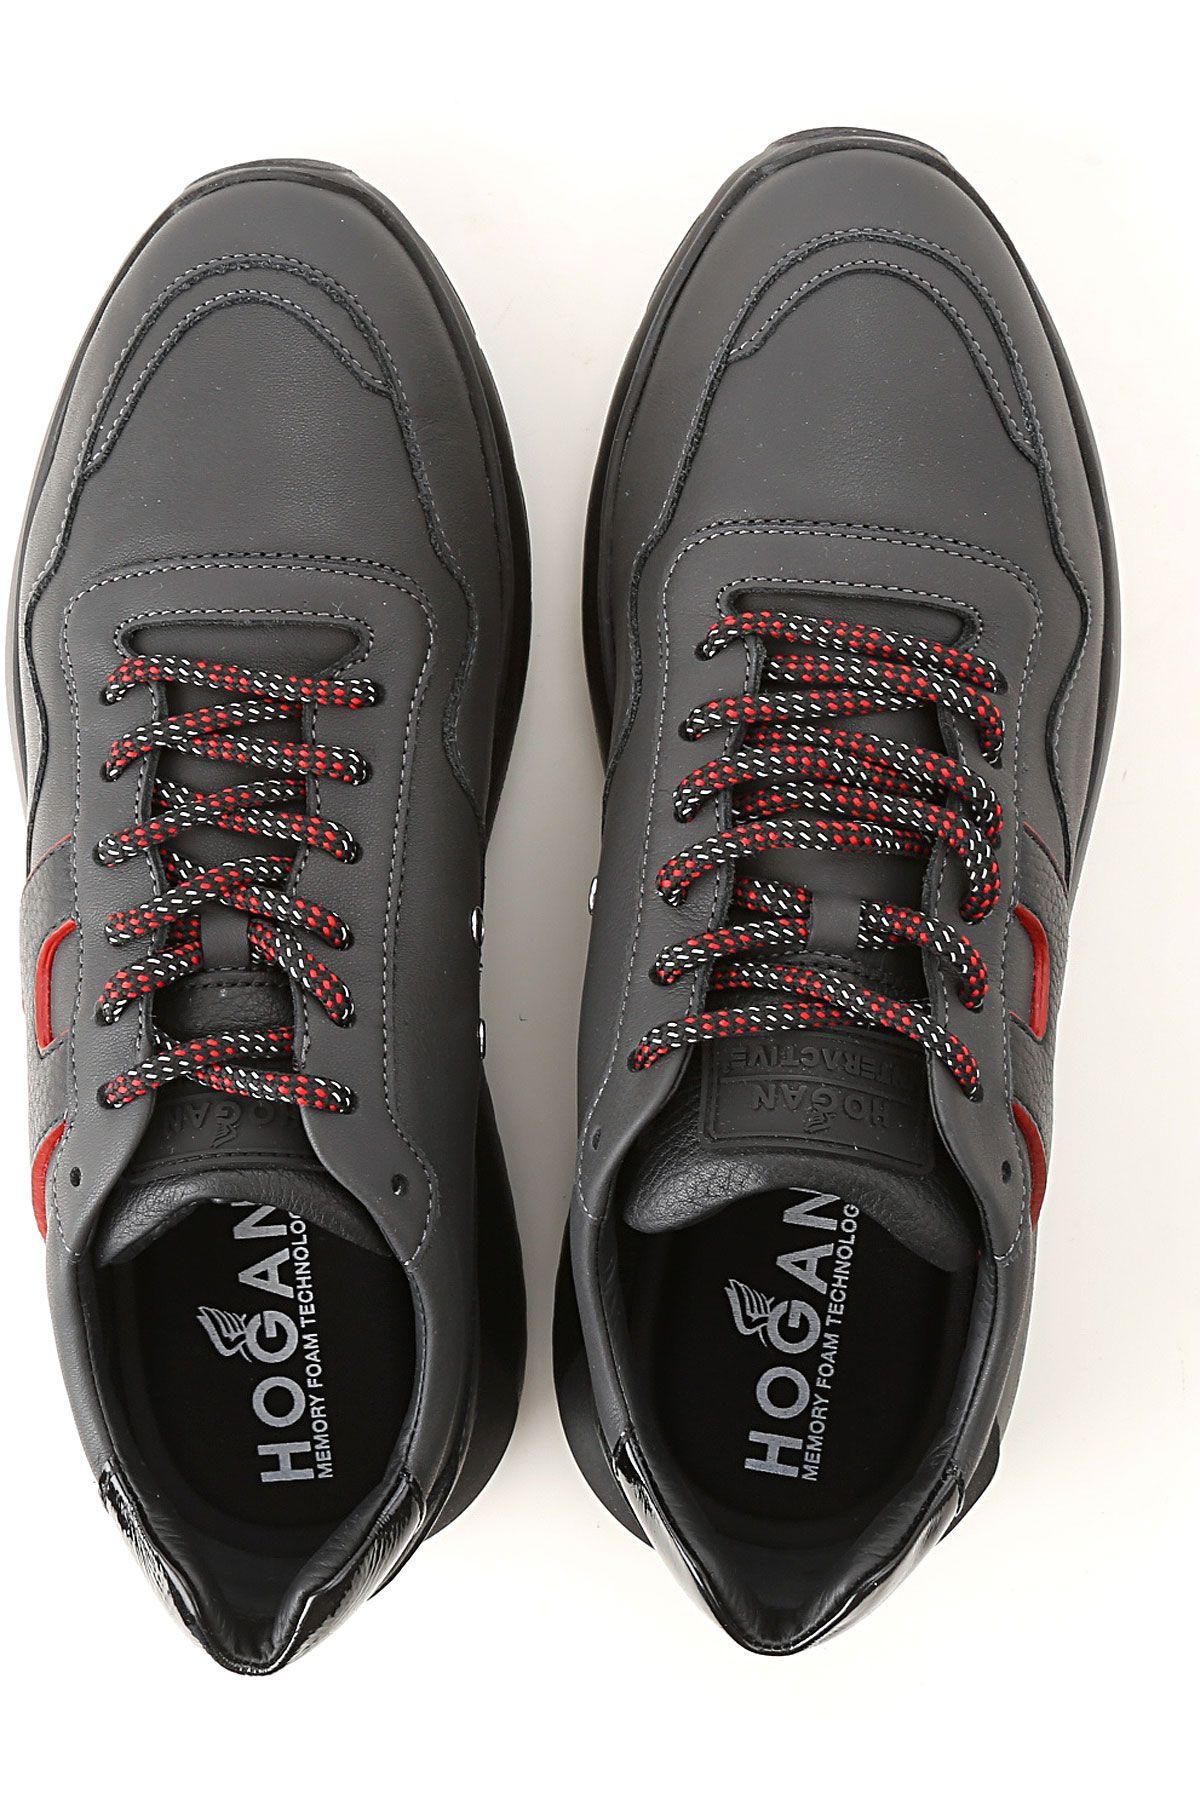 Red and Black H Logo - Hogan Shoes For Men Fall 2018 19 Black•Other Colors:Red